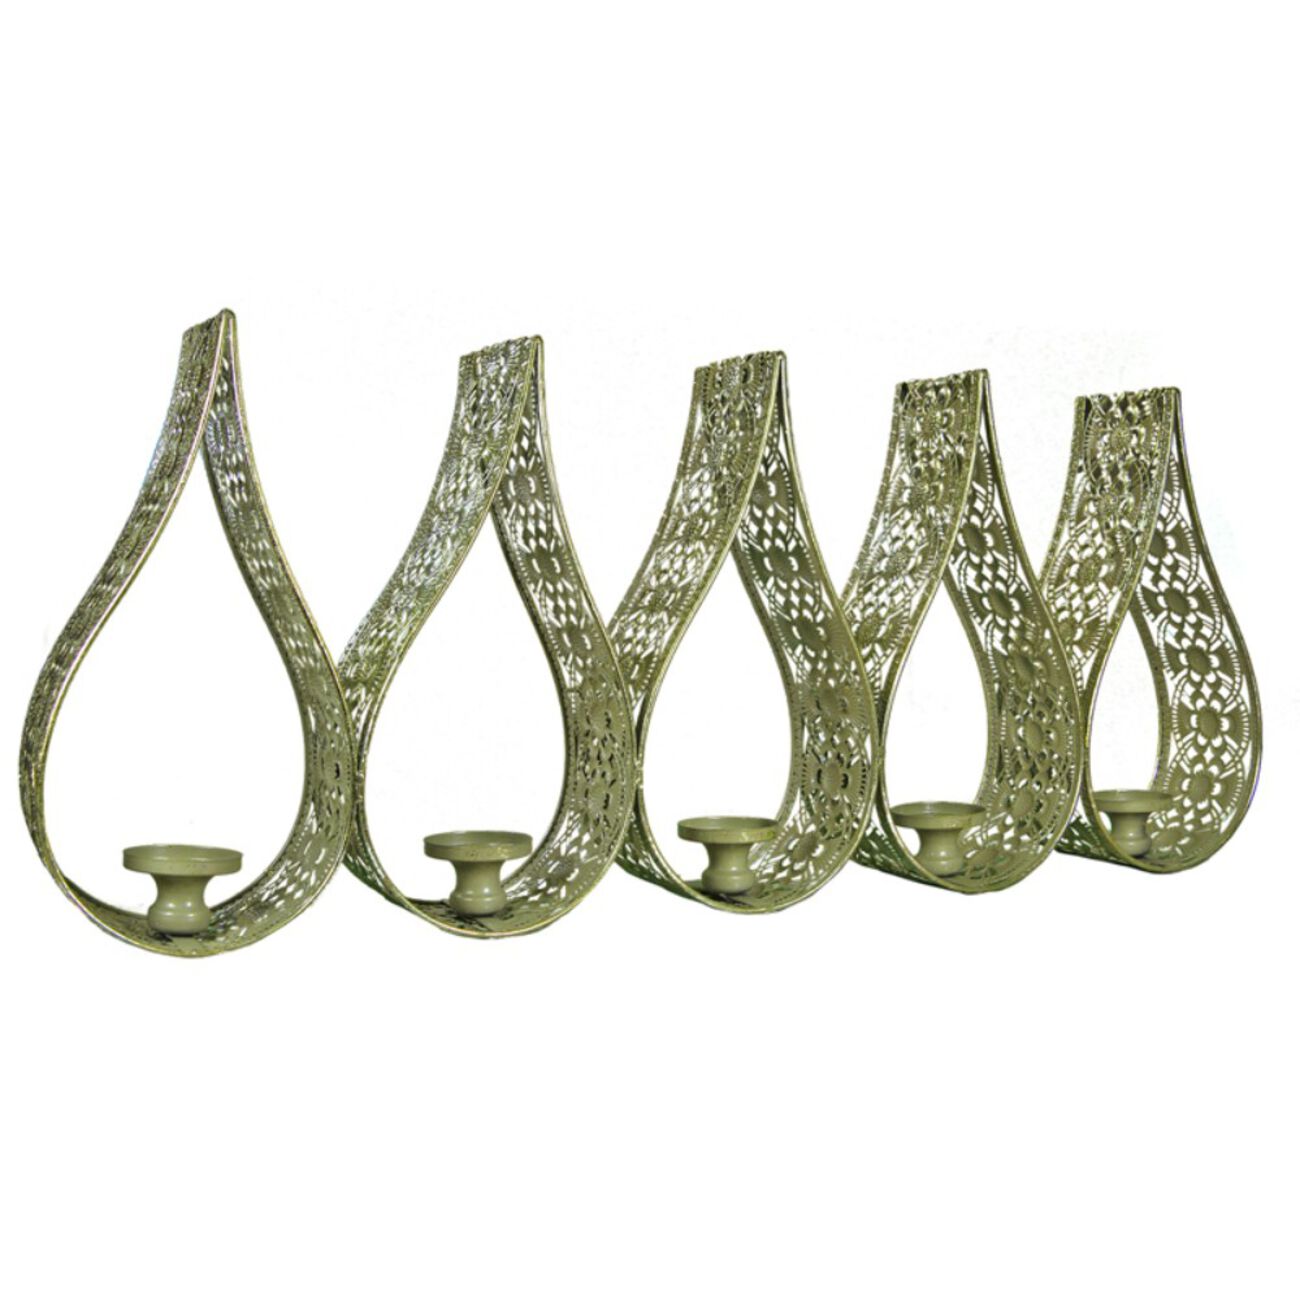 Metal Candle Holder In An Array, With 5 Holders, Beige